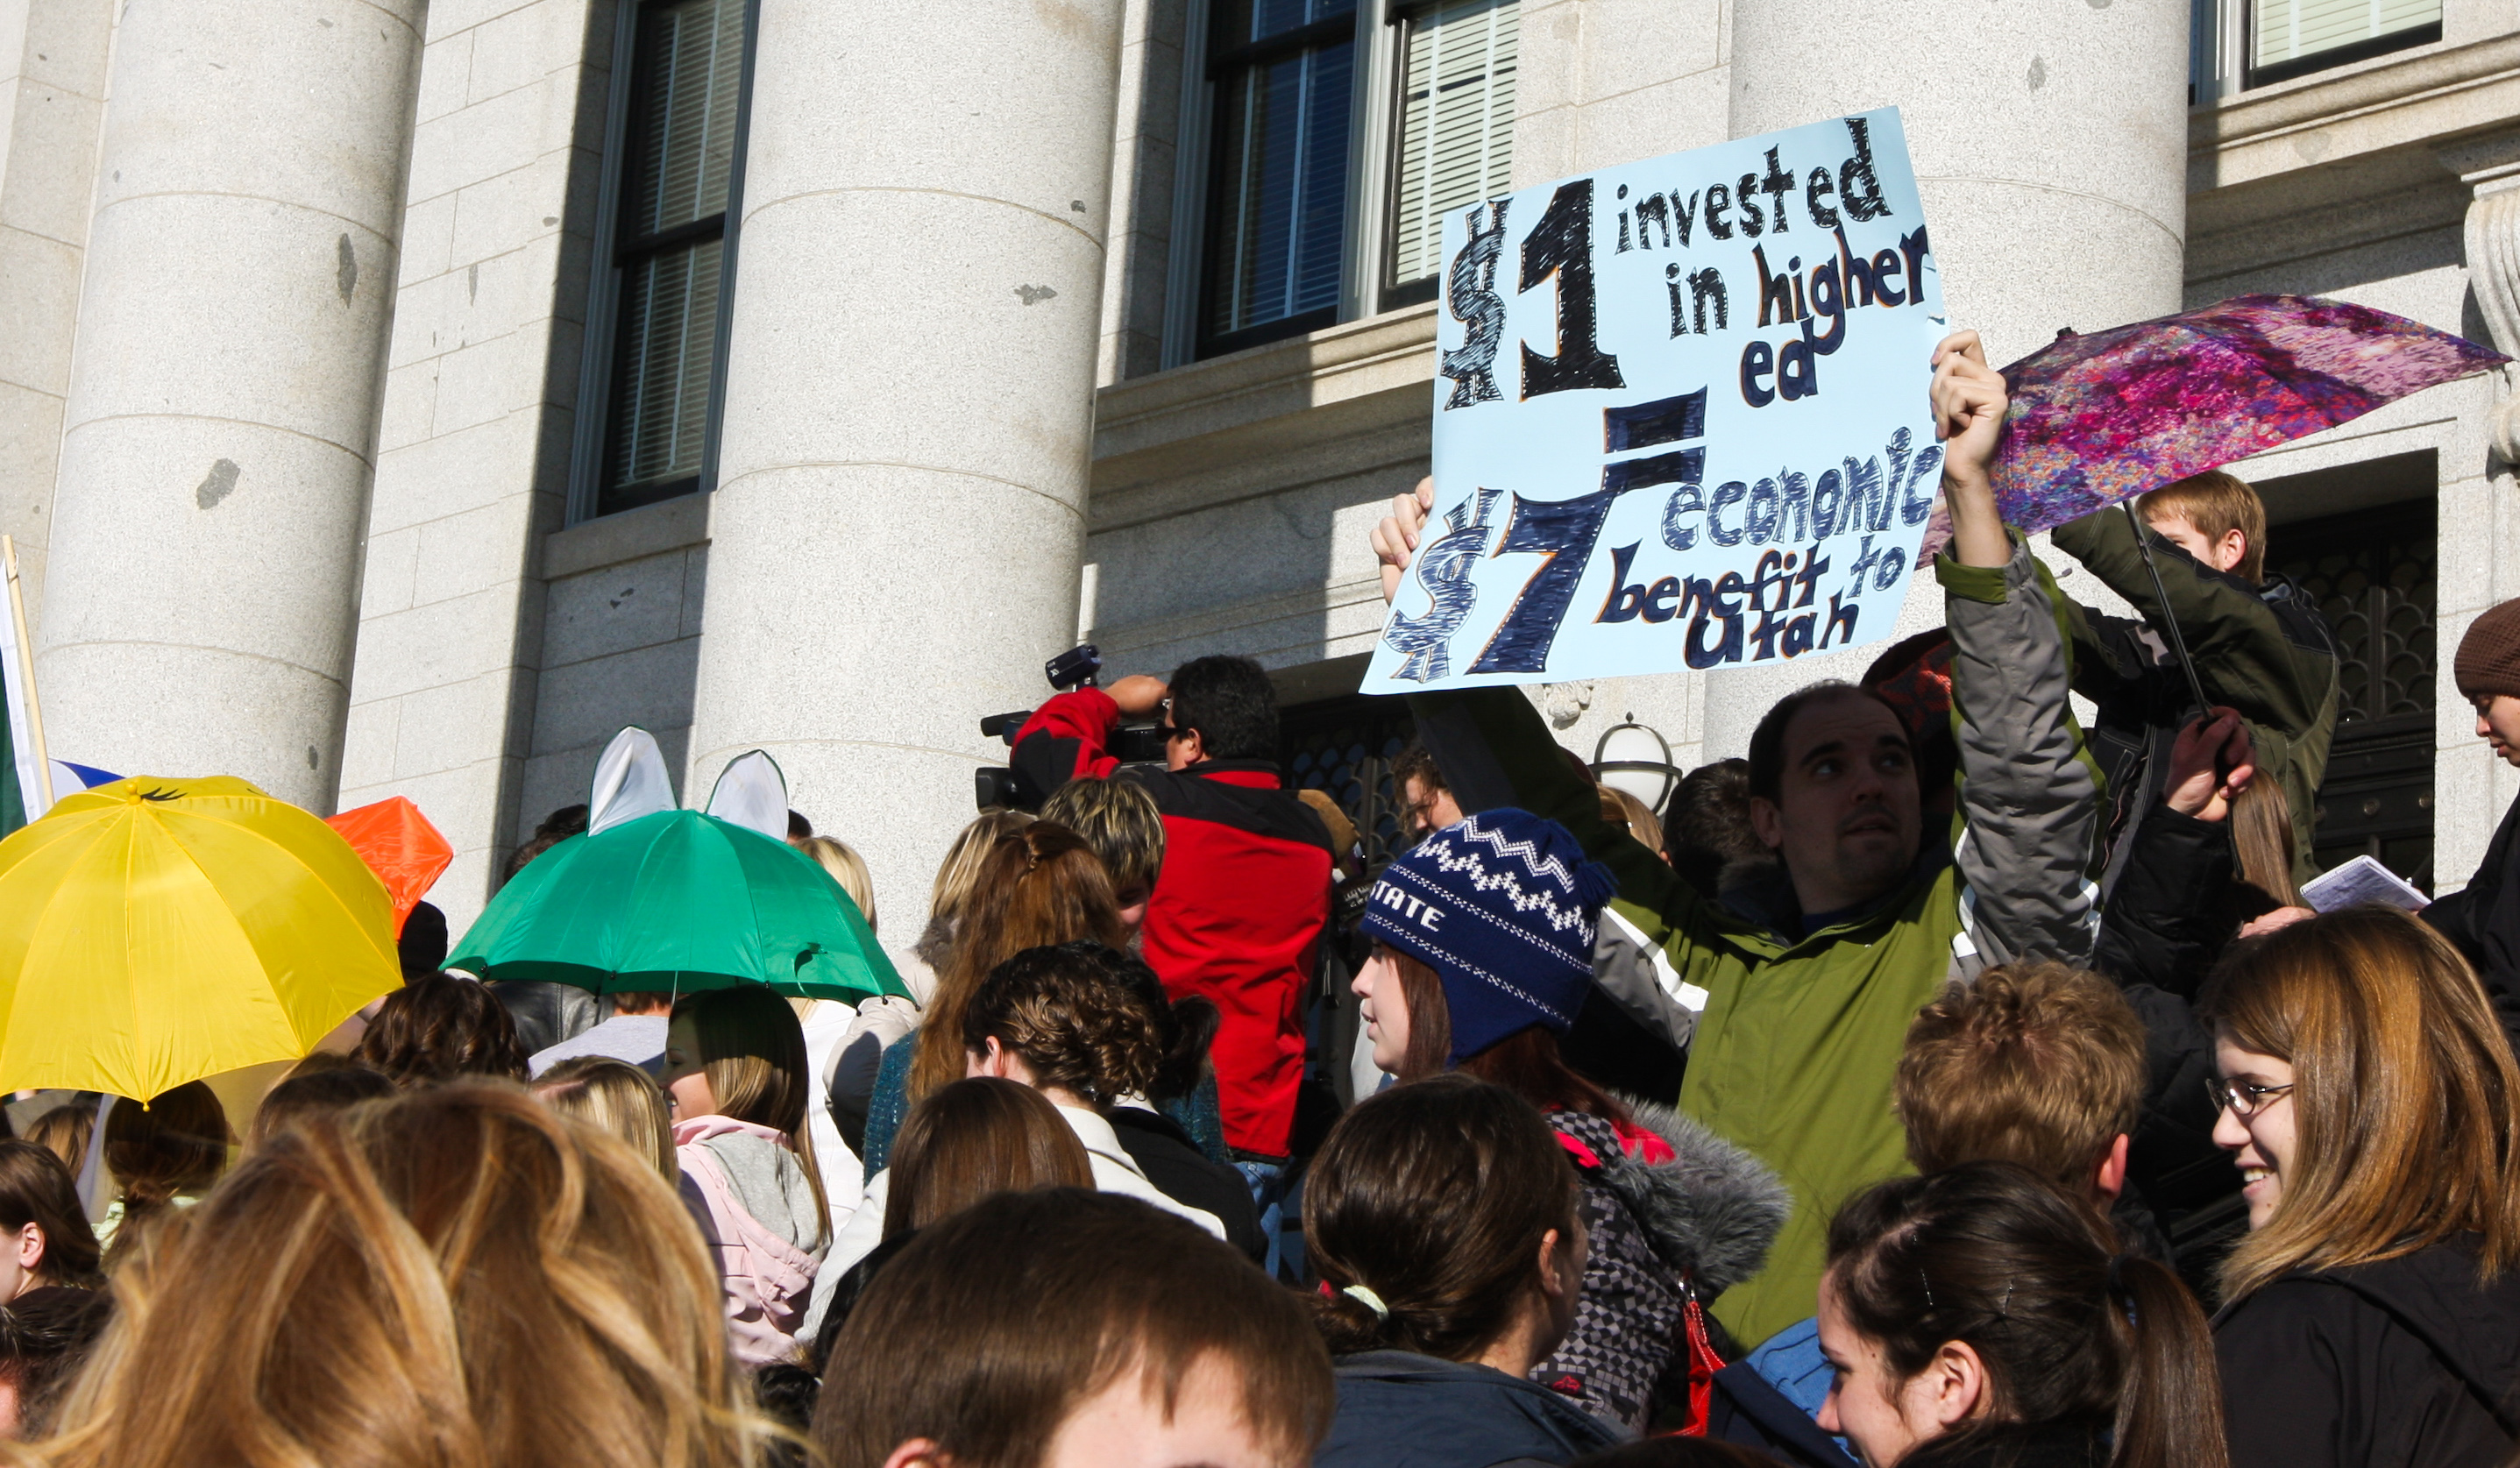 Protestors gather on the steps of the Utah State Capitol Building. (David Scott, 2009)